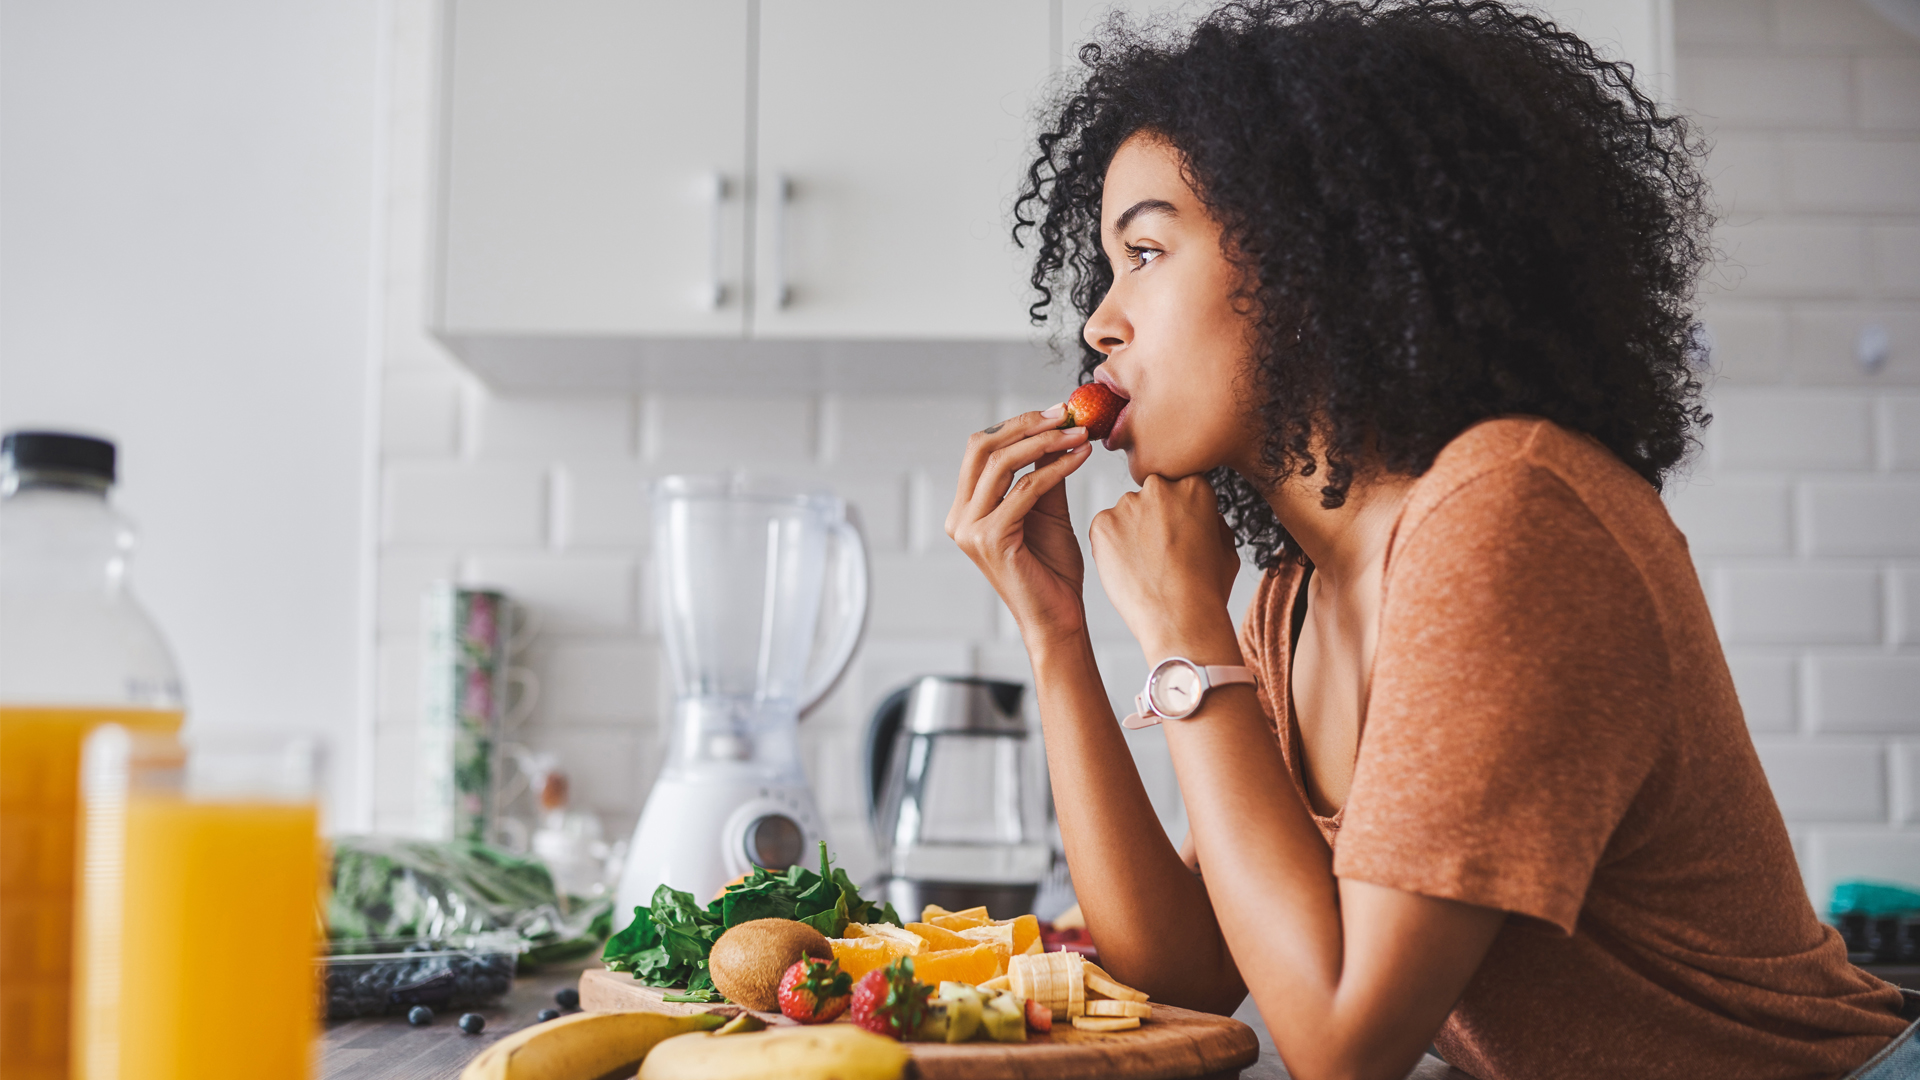 Image of woman and fresh food to be prepared